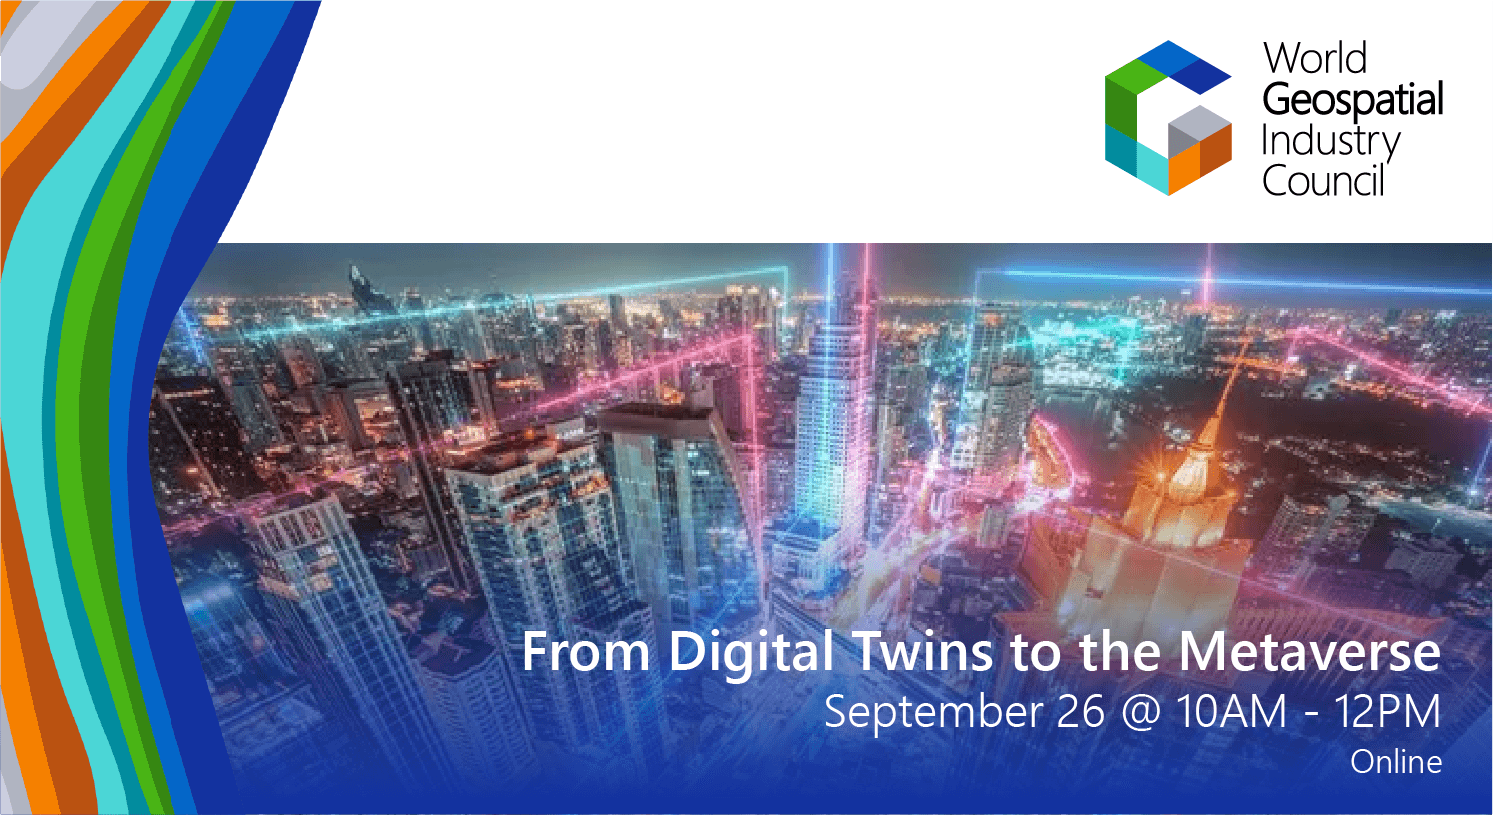 From digital twins to metaverse WGIC Event